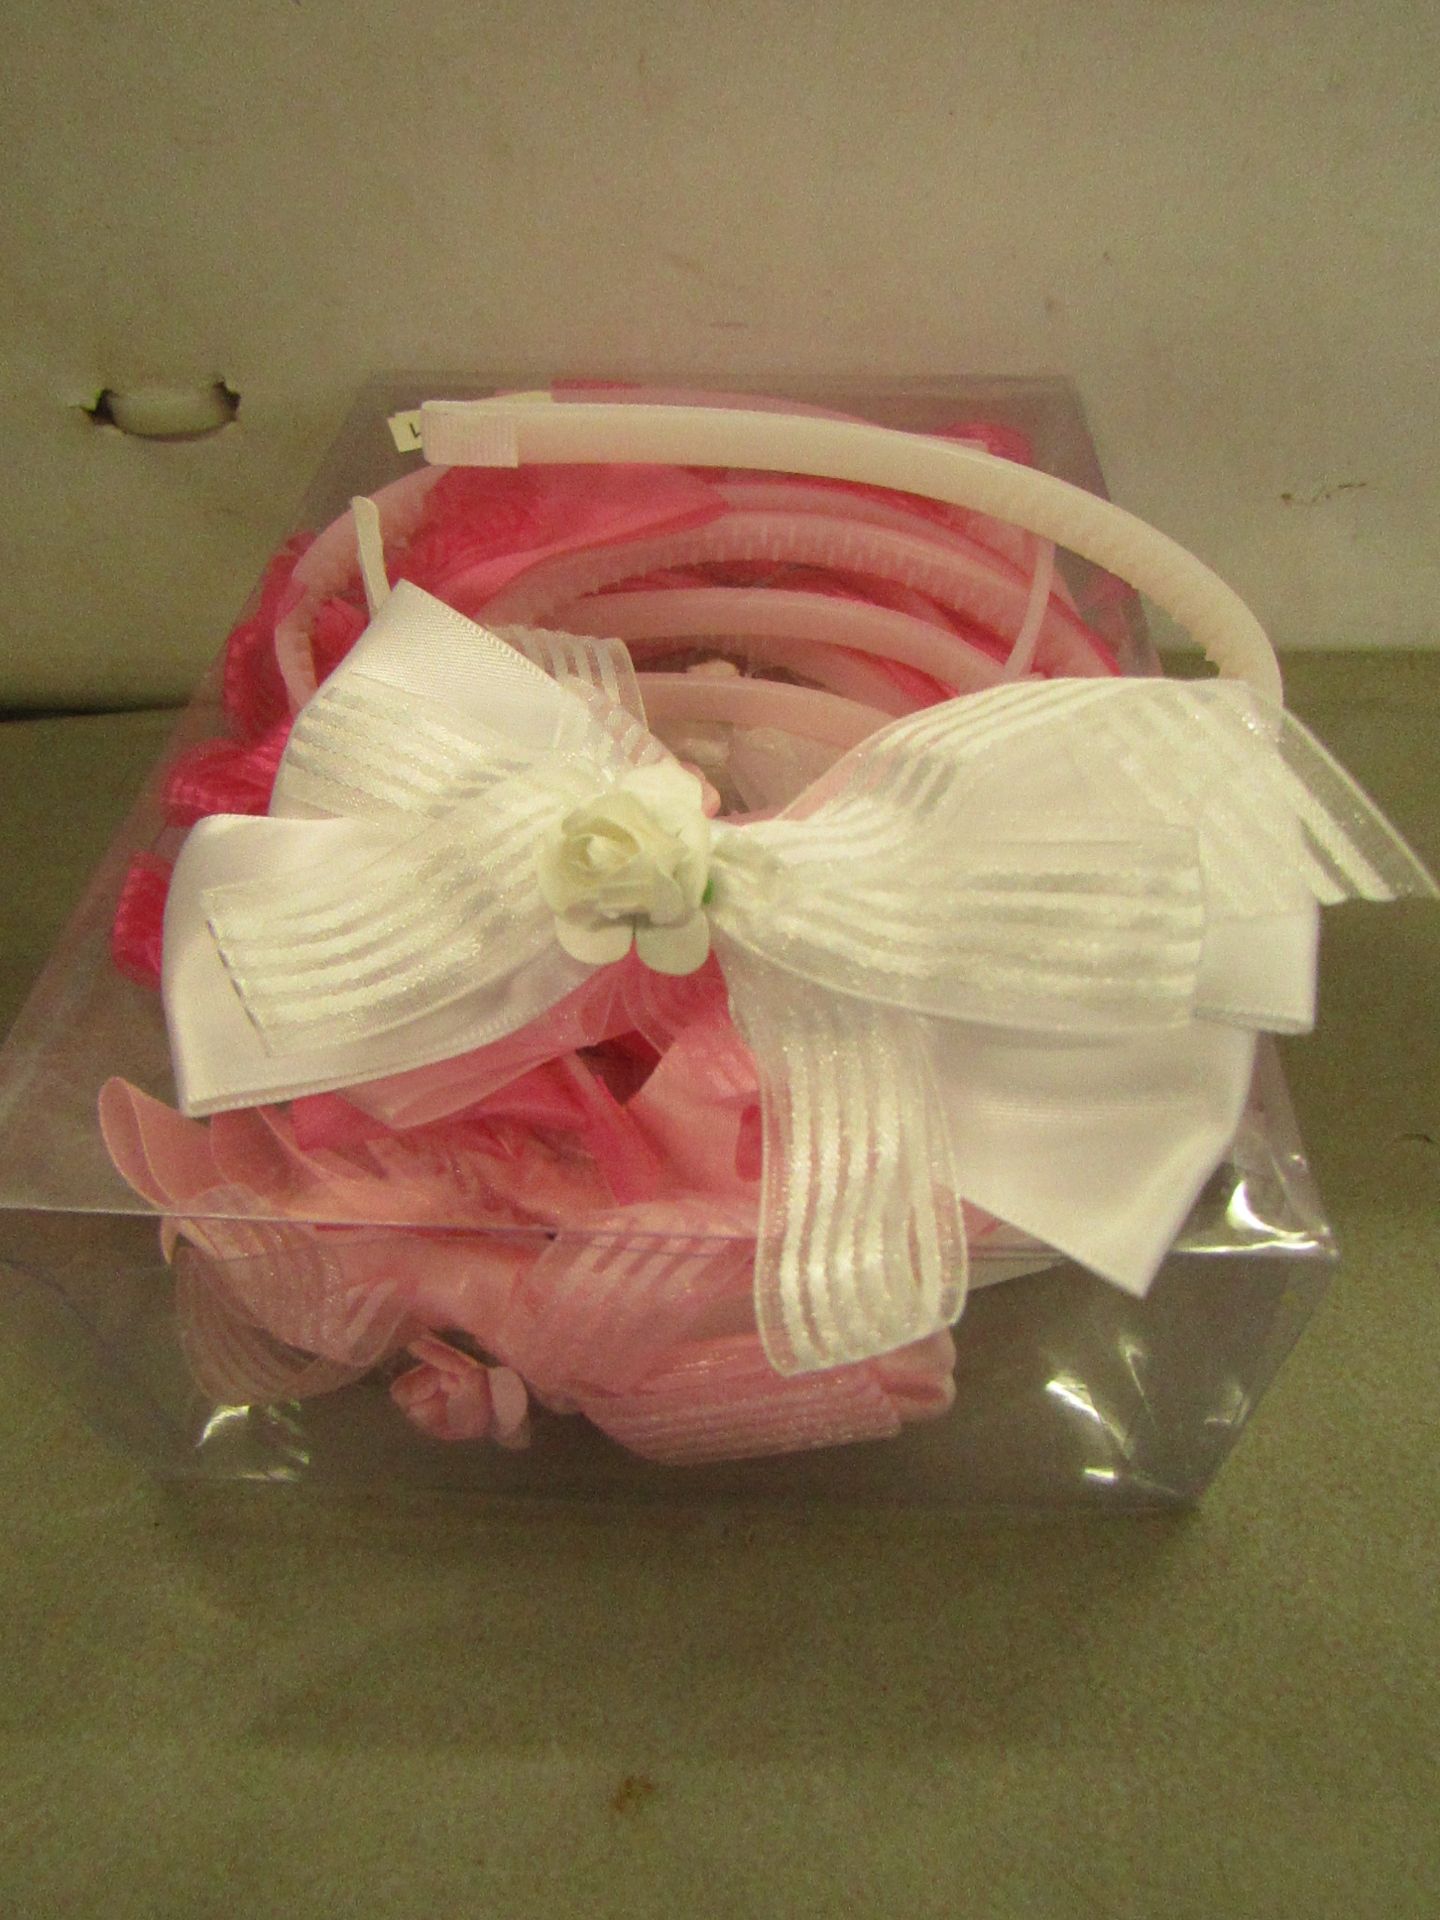 12 x various Coloured Diamante & Bow Headbands similar product is RRP £3.50 each @ Claires